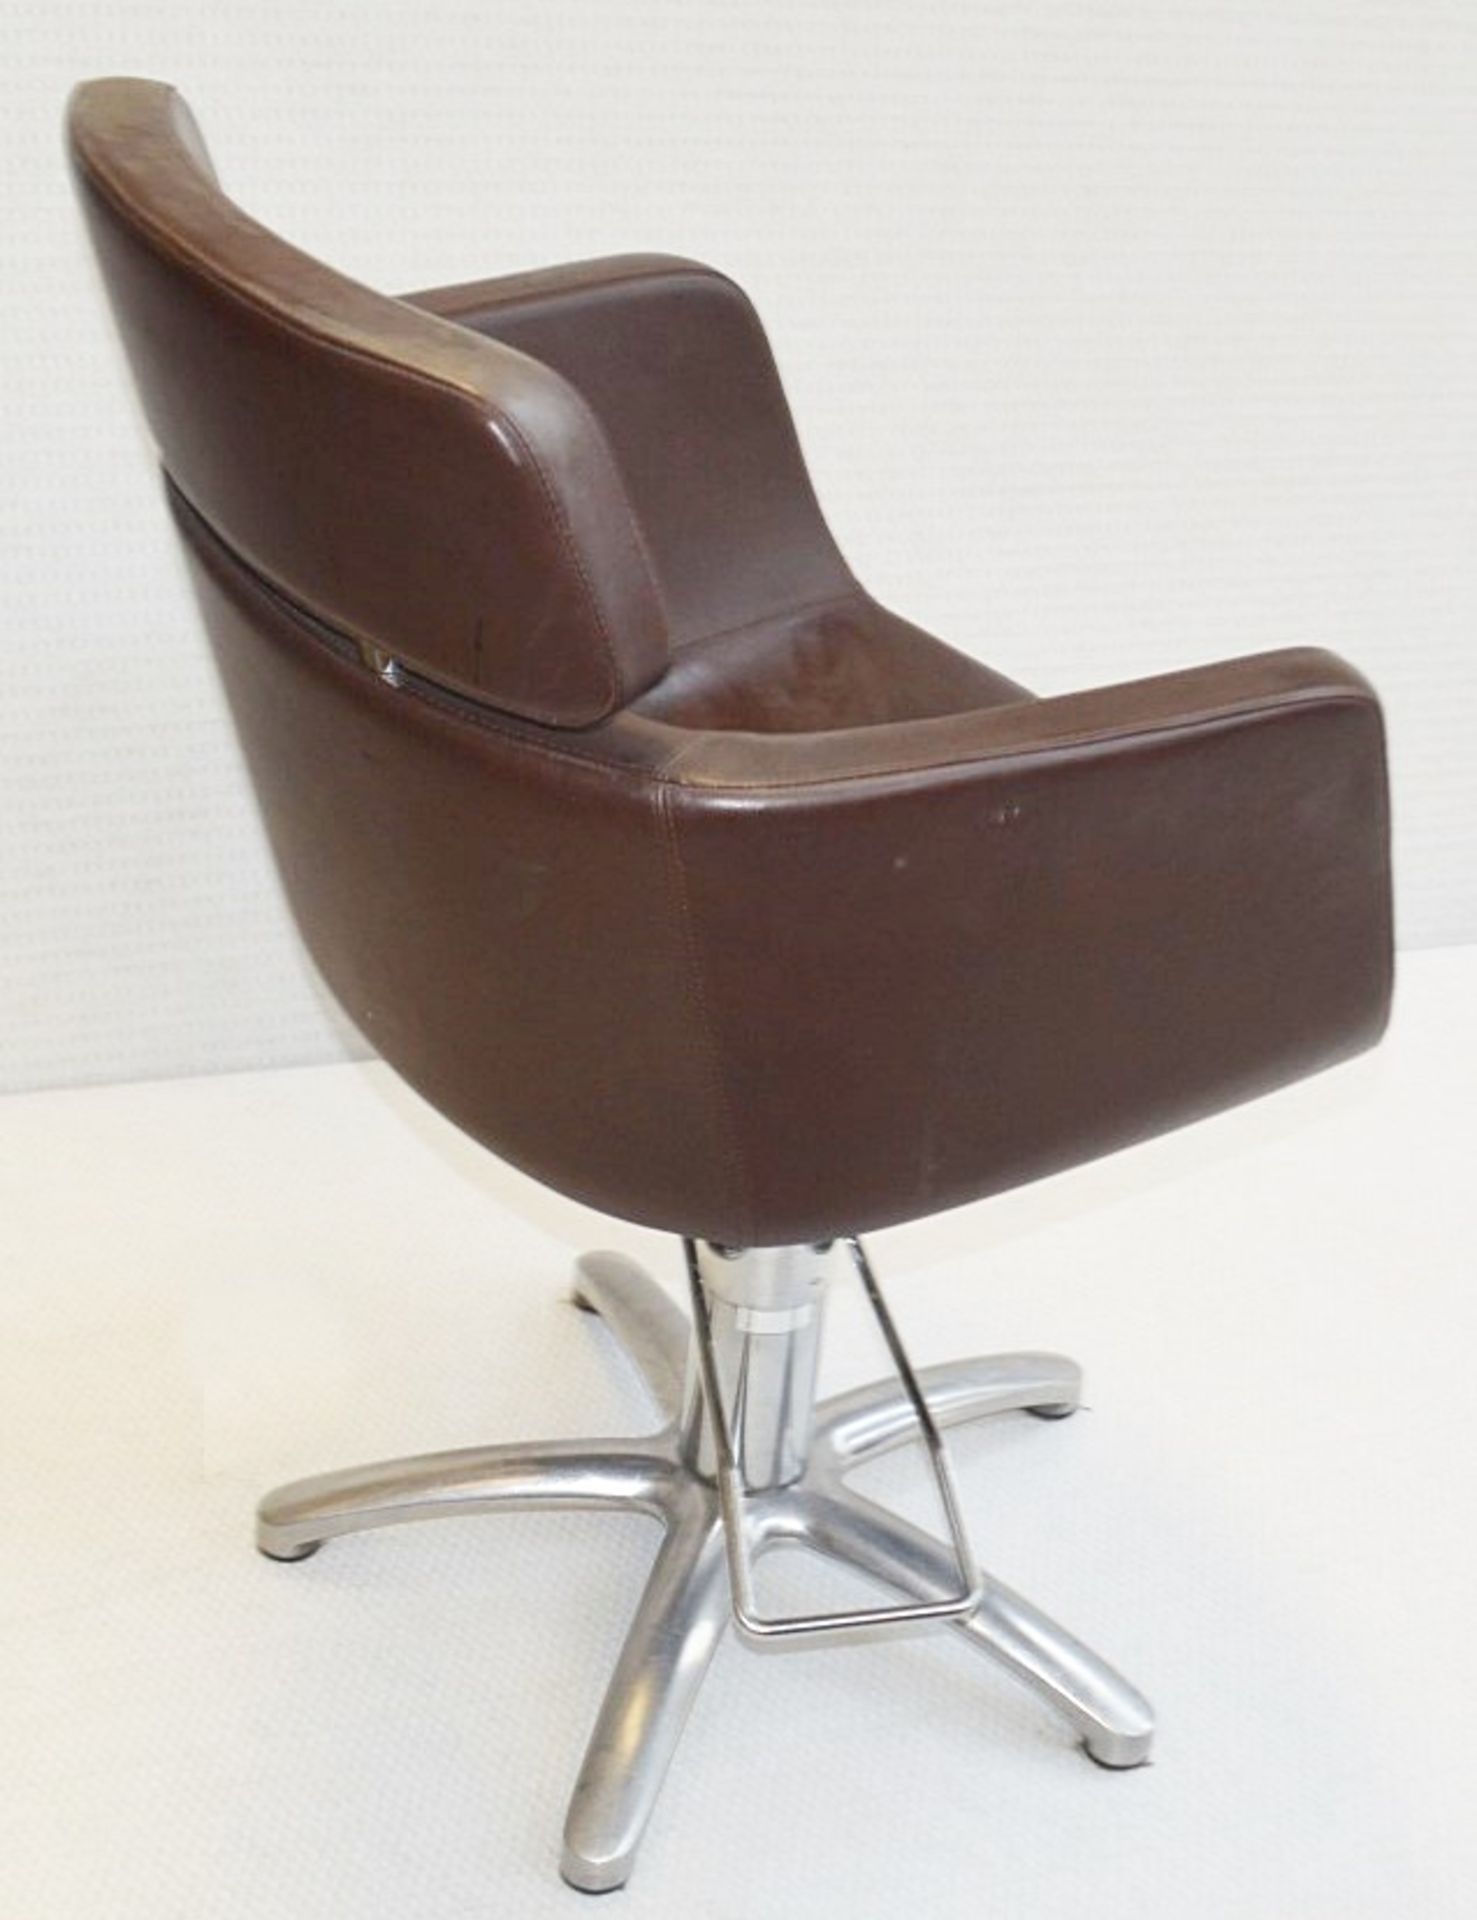 5 x Malet Branded Professional Hairdressing Salon Swivel Chairs In Brown - Includes 4 x Foot Rests - Image 5 of 7